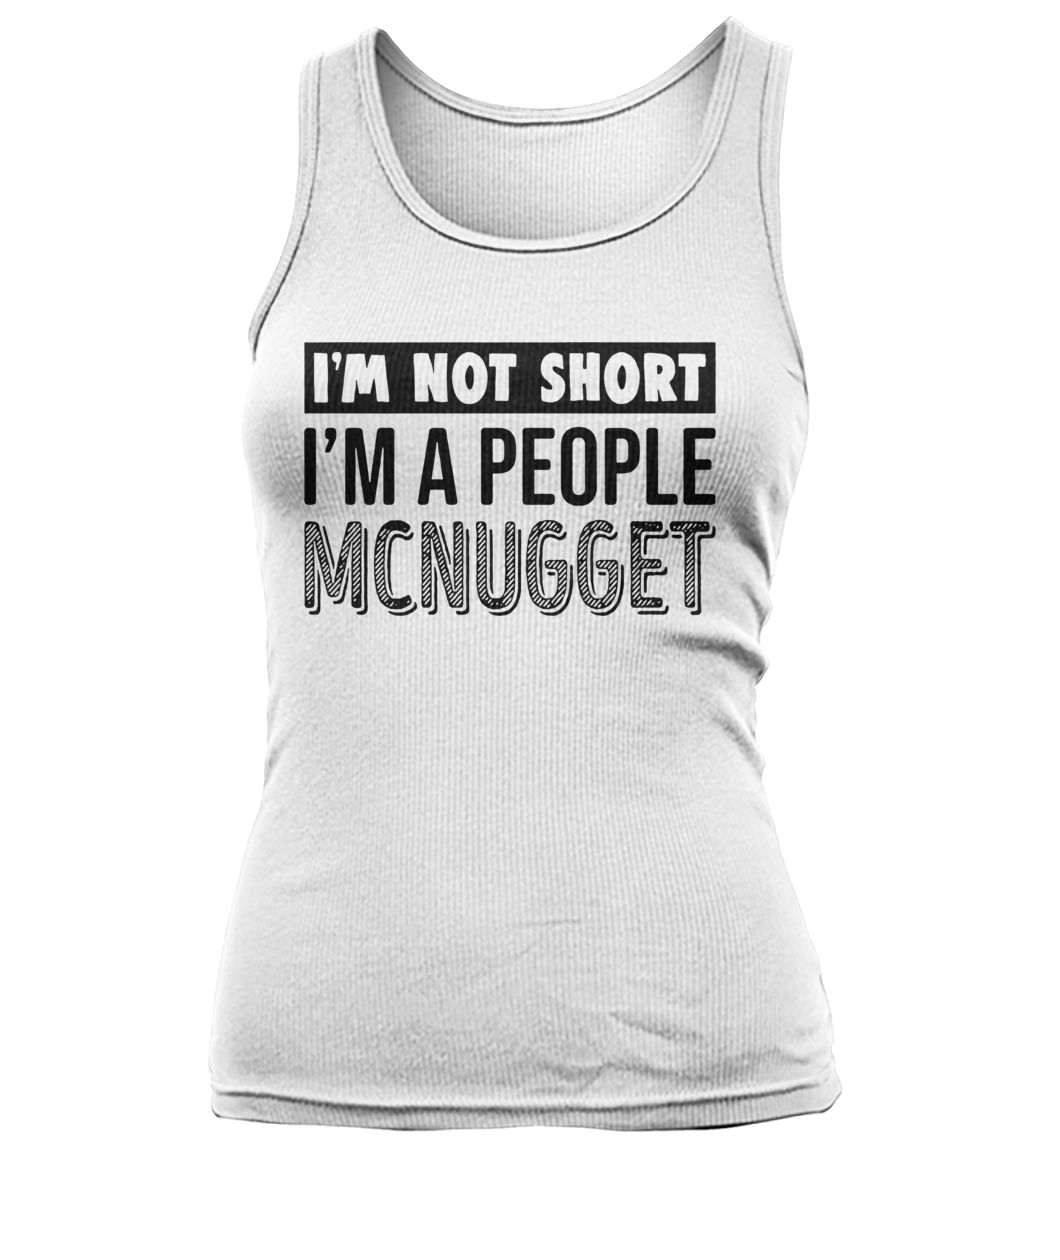 I'm not short I'm a people mcnugget women's tank top